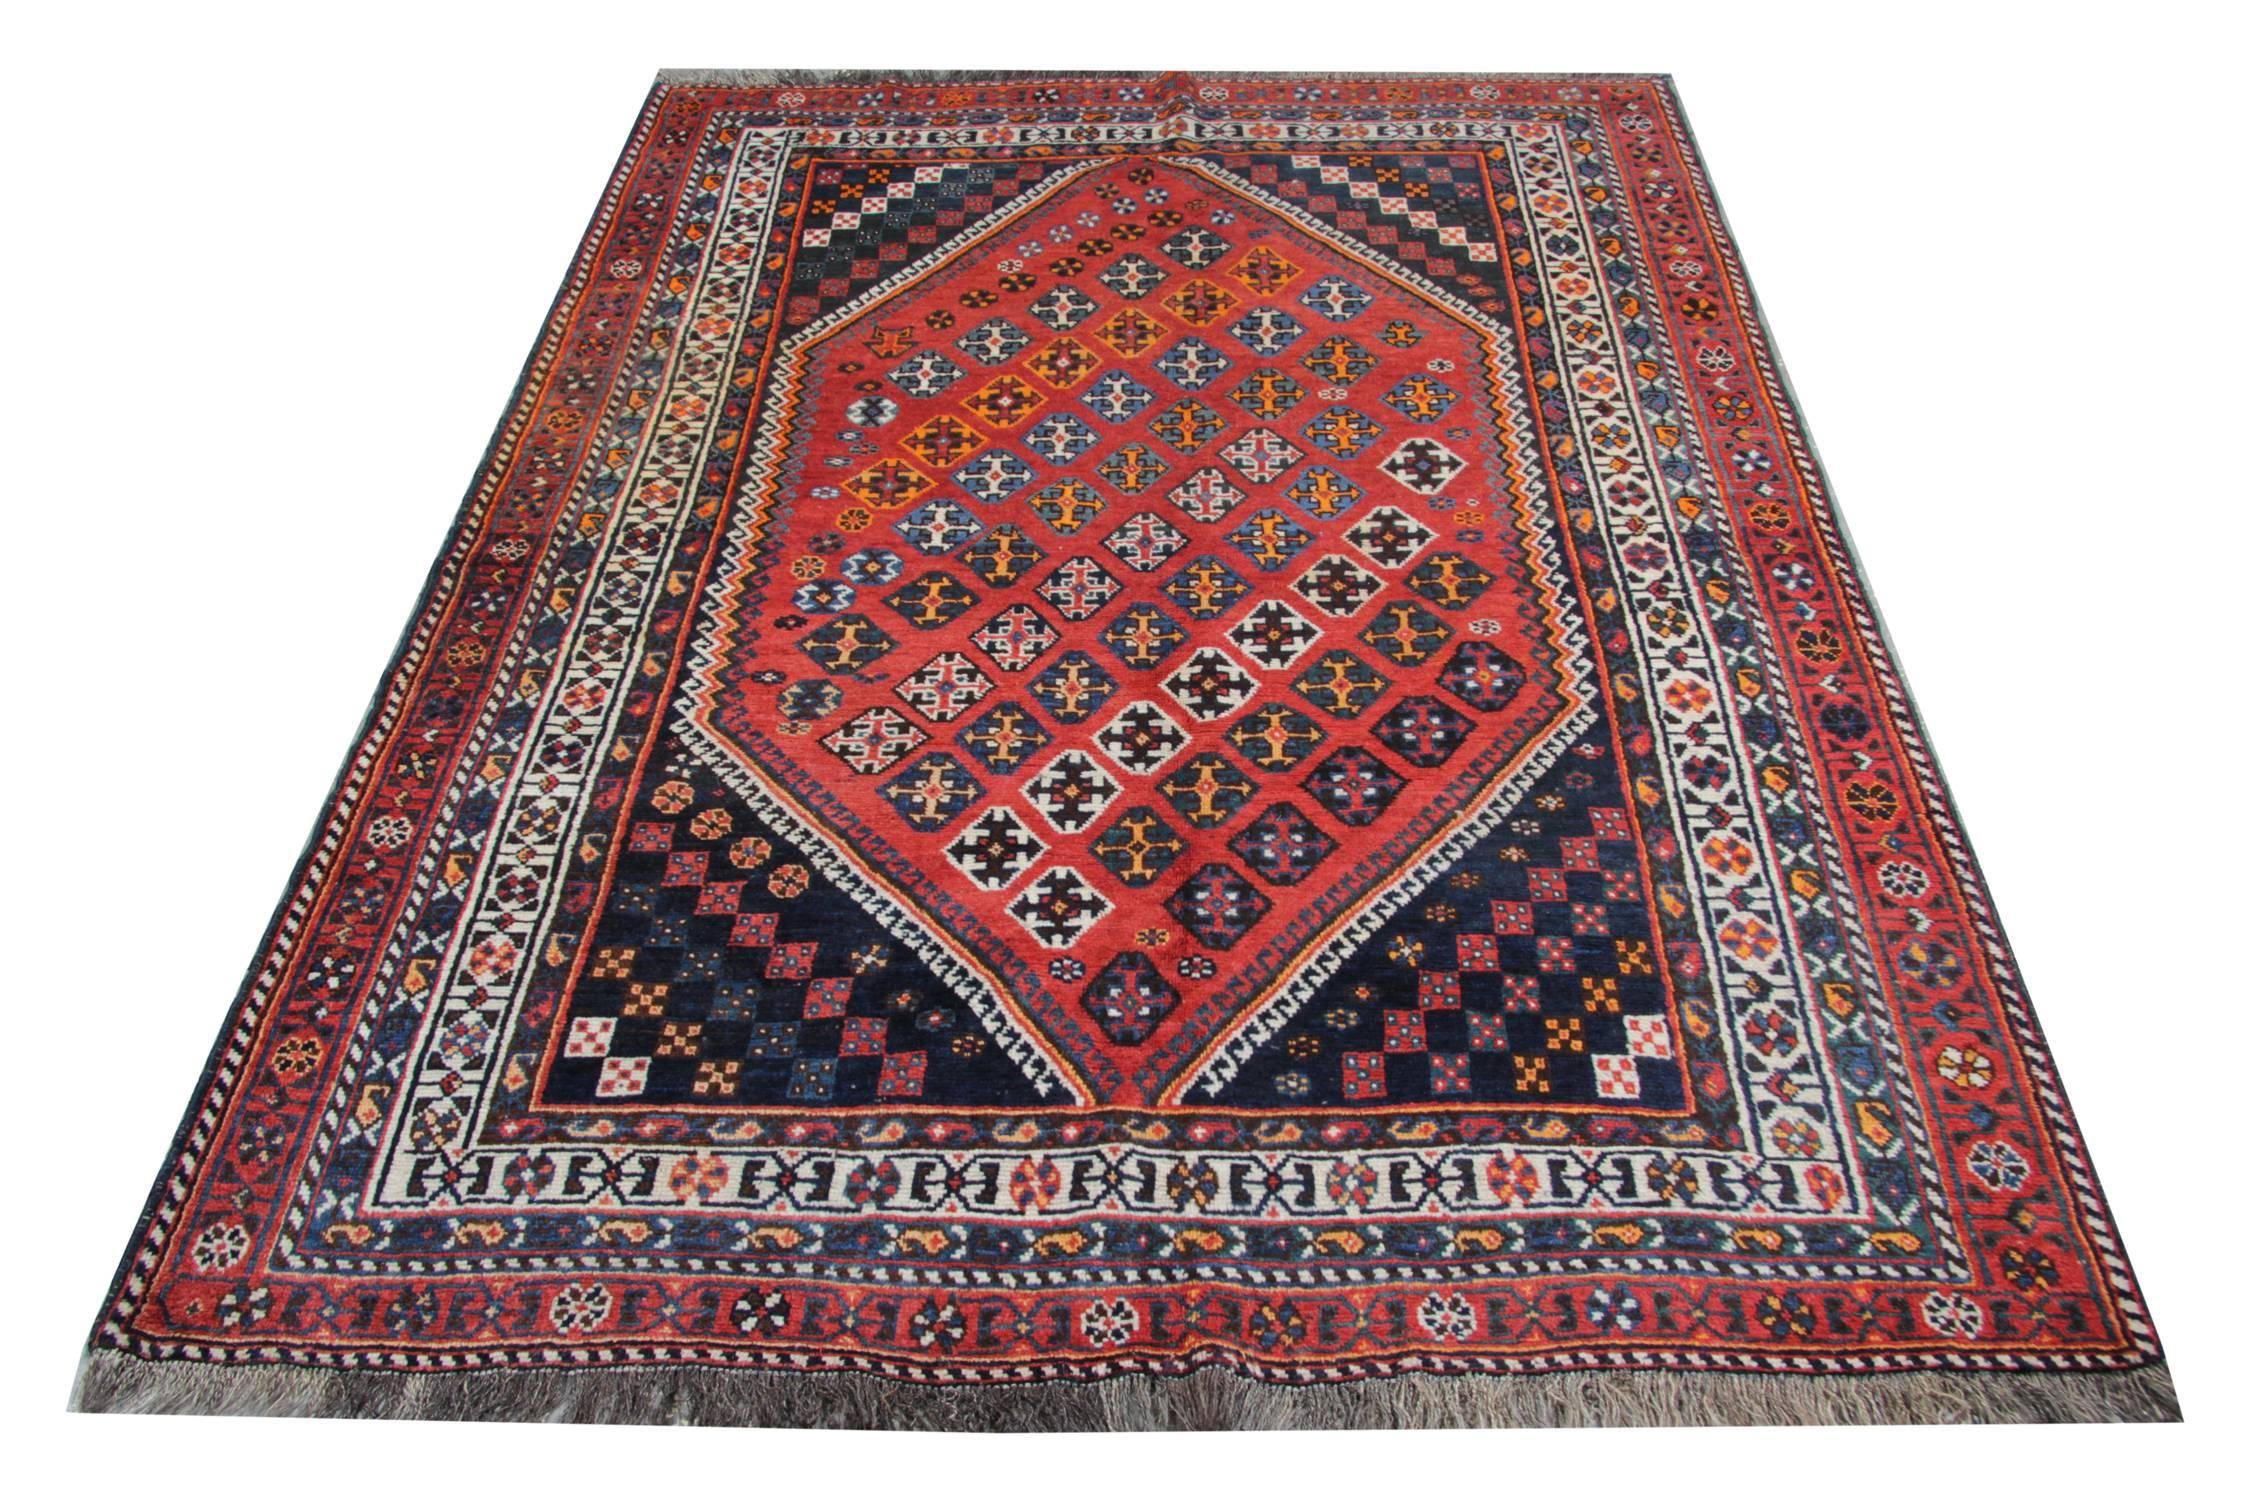 Lori handmade rugs are woven by the Lurs Tribe, which is a nomadic tribe in the mountainous Bakhtiyari region of Southwest Iran. This tribal rug is produced only with wool and it has a traditional geometric rug design. This red rug has an all over